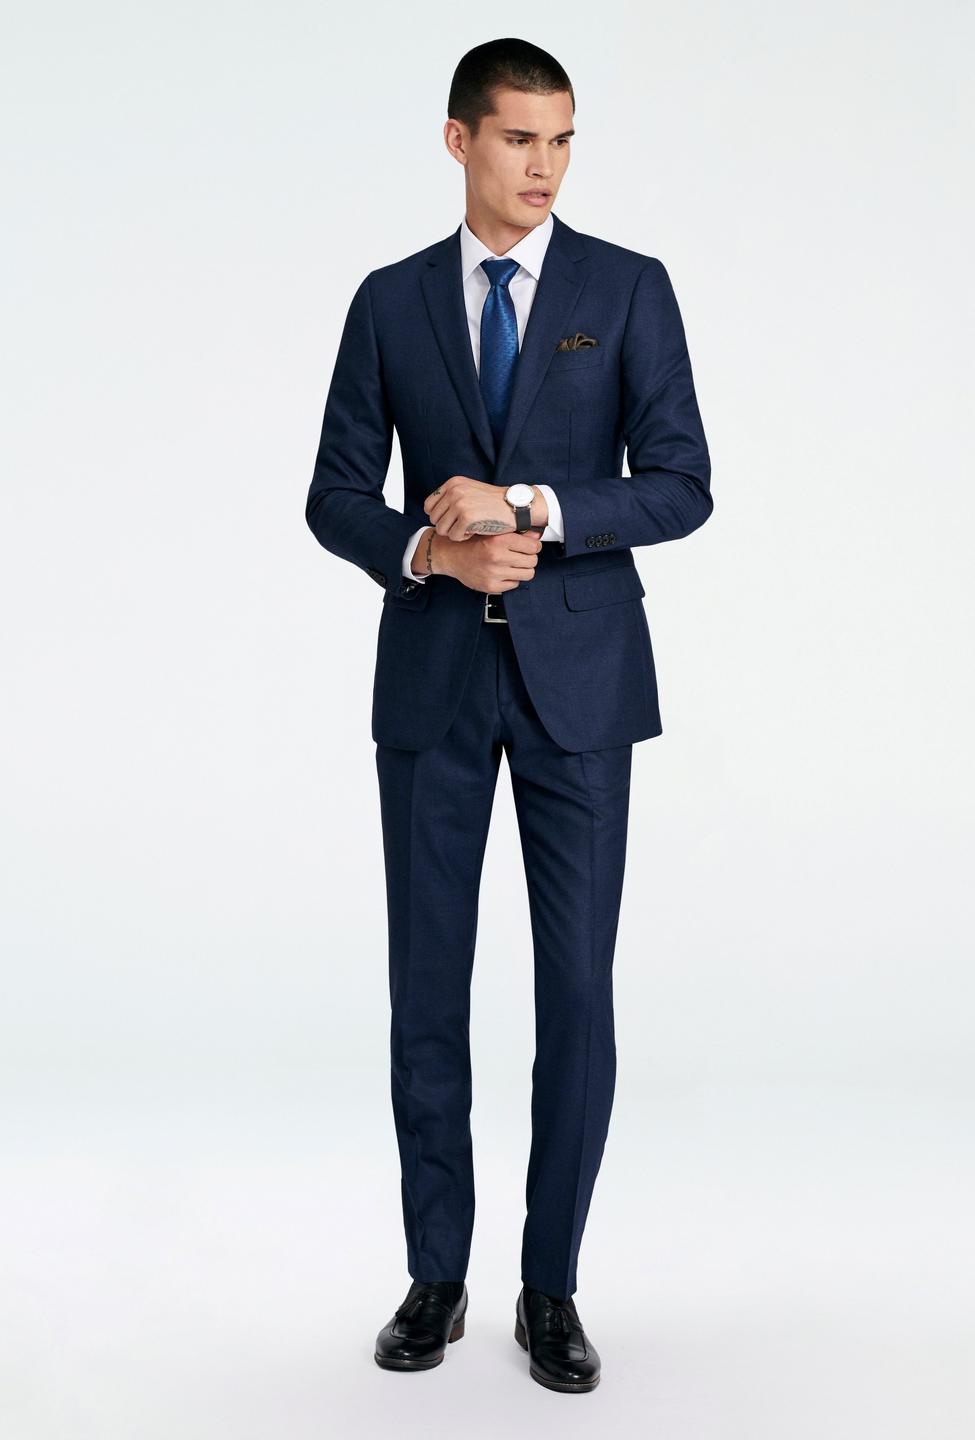 Blue suit - Bottsford Checked Design from Seasonal Indochino Collection